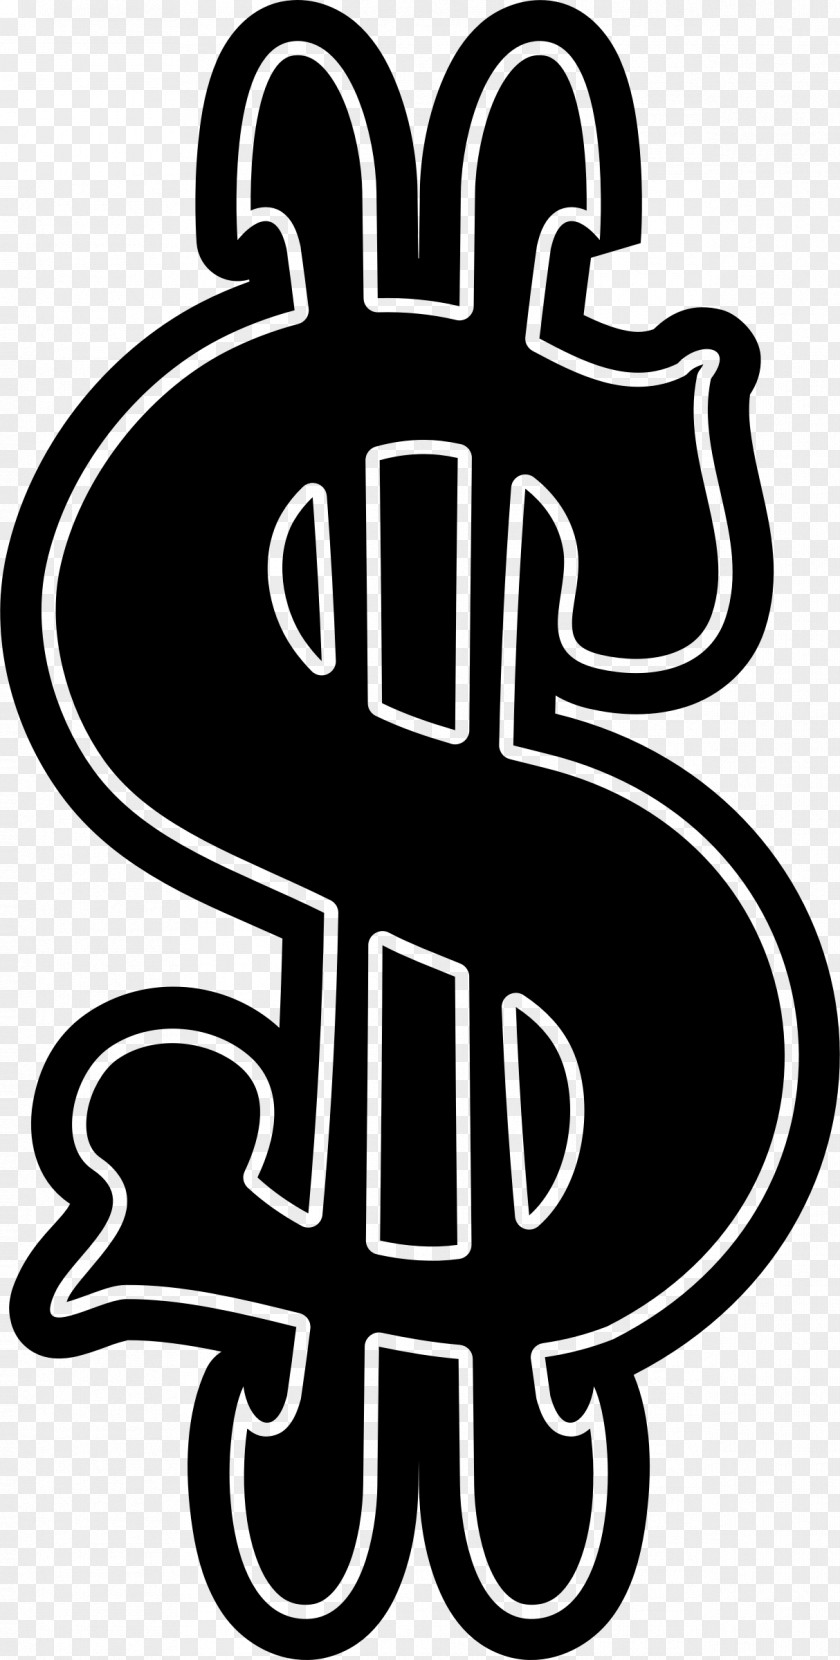 Freedom Dollar Sign United States Coin Clip Art PNG